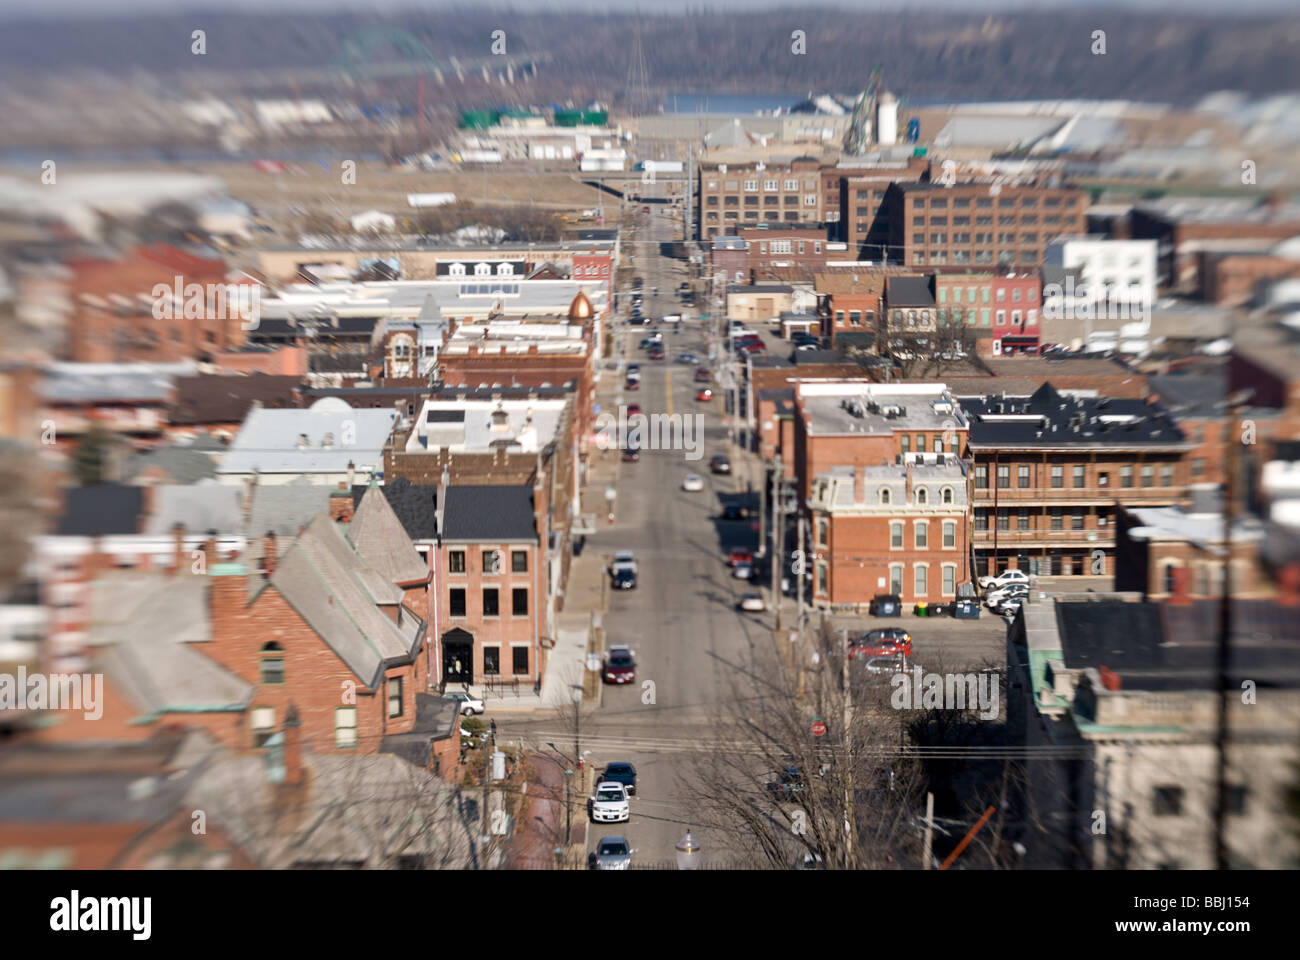 View of a downtown midwestern American city. Dubuque, Iowa. Stock Photo